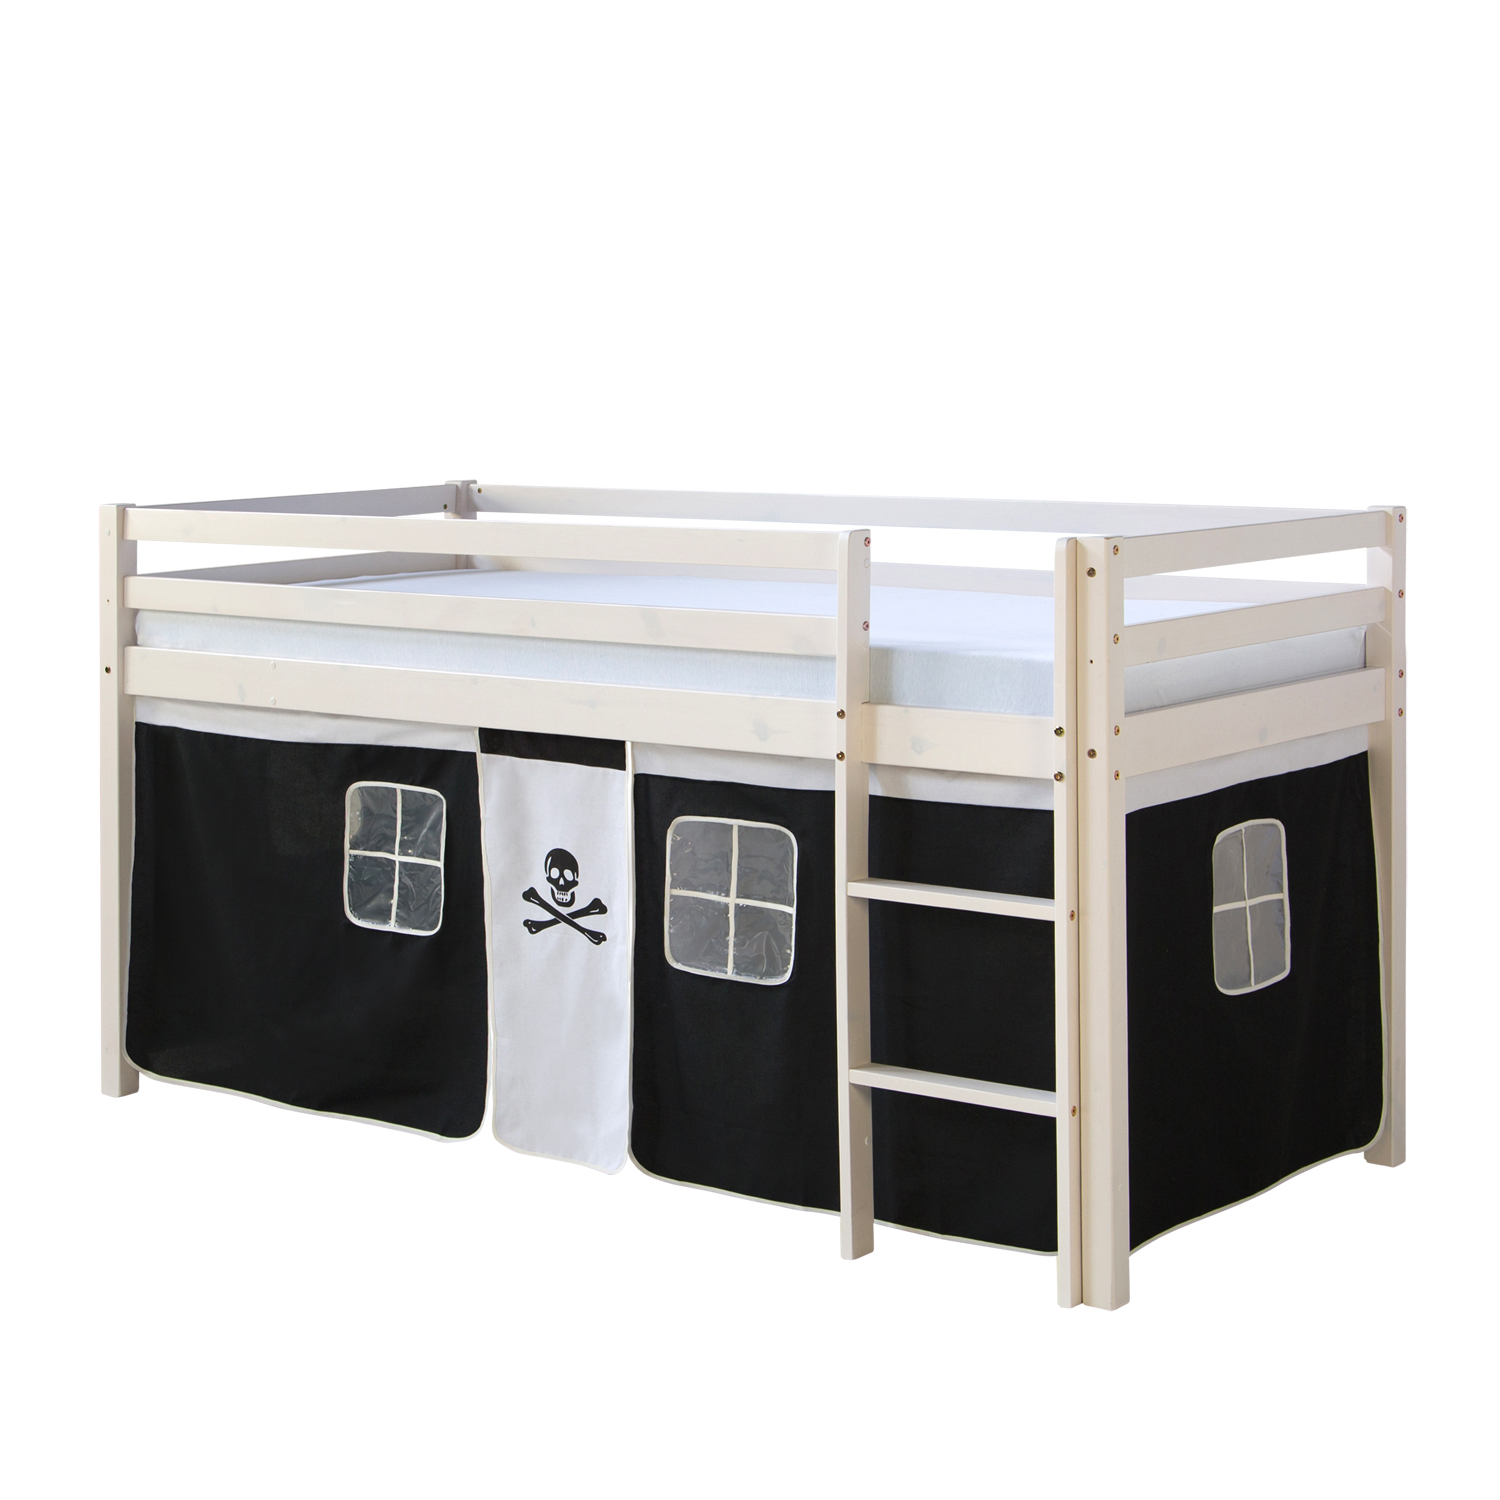 Loftbed 90x200 cm with Mattress Bunk bed Childrens bed Solid Pine Wood Slats Curtain Black Pirate